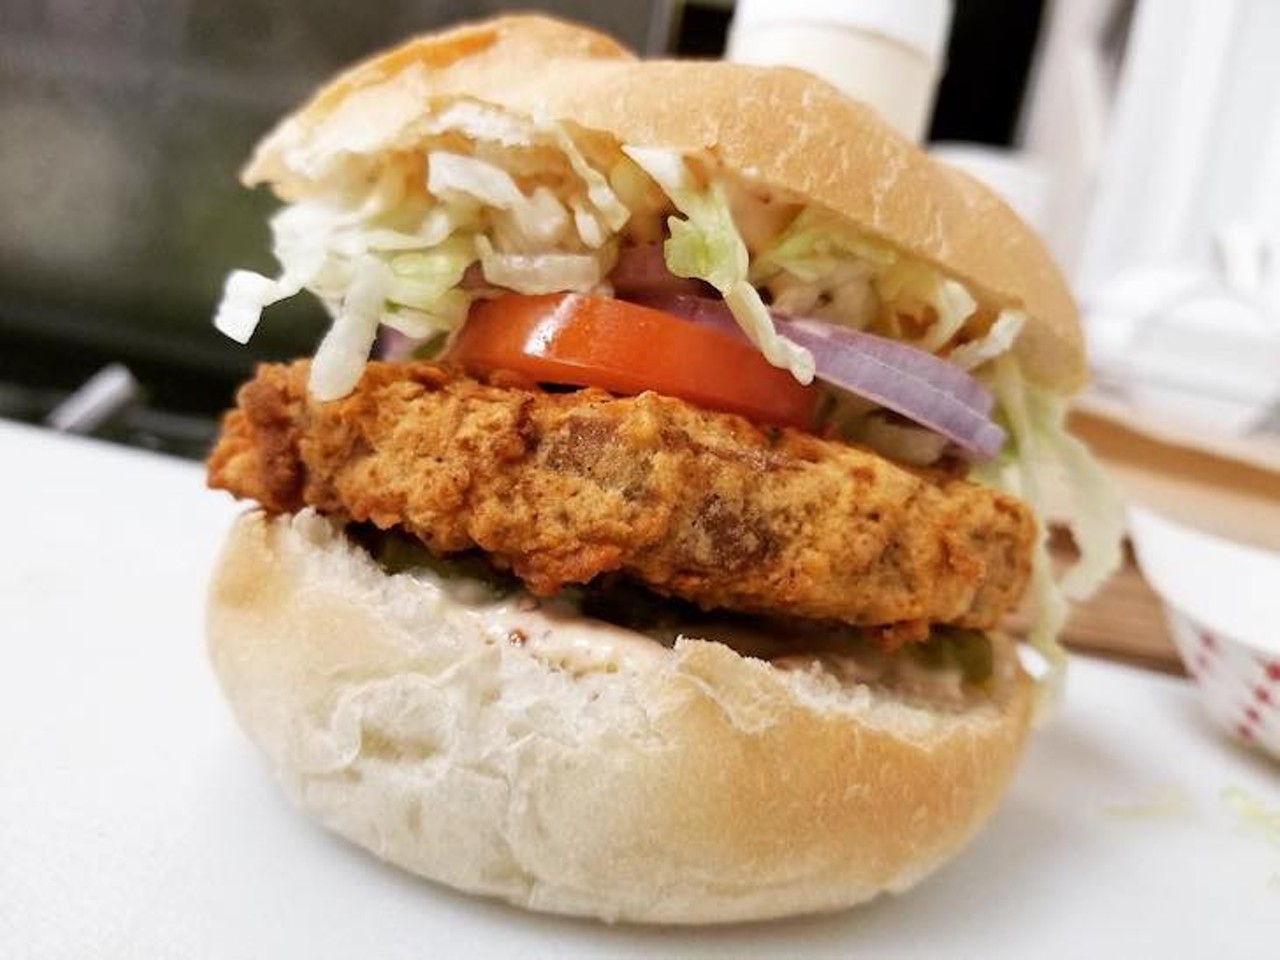 3 Dot Dash  
6203 N Florida Ave, Tampa, 813-675-4522
3 Dot Dash &#151; a vegan kitchen that&#146;s been popping up on both sides of the bay, features a popular fried &#147;chicken&#148; cutlet sandwich, among other plant-based delights. 
Photo via 3 Dot Dash/Facebook